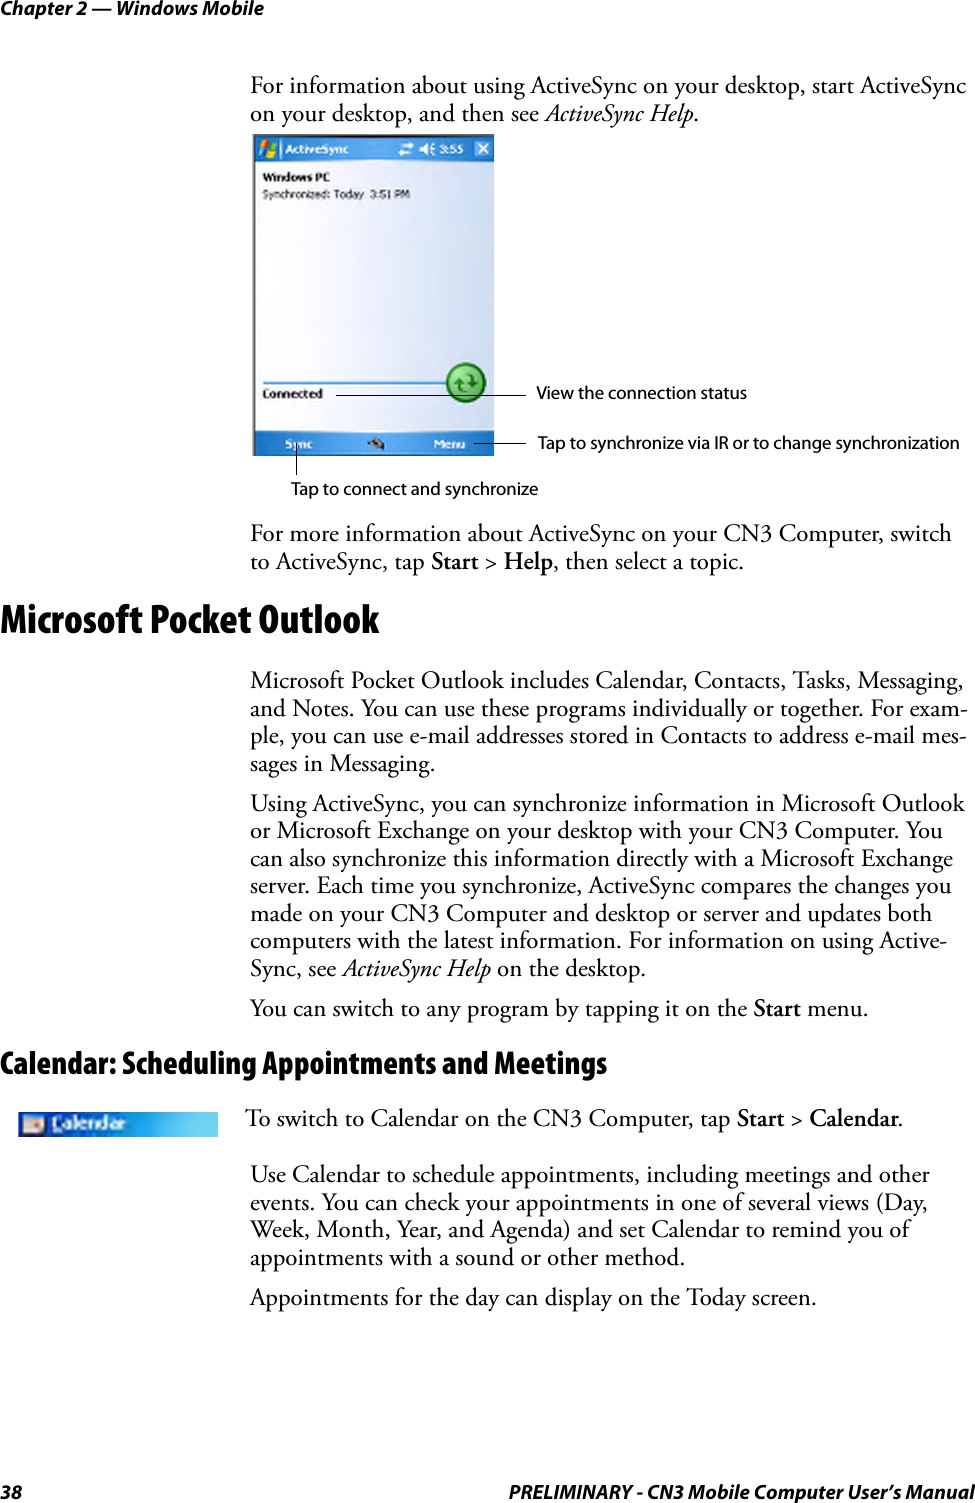 Chapter 2 — Windows Mobile38 PRELIMINARY - CN3 Mobile Computer User’s ManualFor information about using ActiveSync on your desktop, start ActiveSync on your desktop, and then see ActiveSync Help.For more information about ActiveSync on your CN3 Computer, switch to ActiveSync, tap Start &gt; Help, then select a topic.Microsoft Pocket OutlookMicrosoft Pocket Outlook includes Calendar, Contacts, Tasks, Messaging, and Notes. You can use these programs individually or together. For exam-ple, you can use e-mail addresses stored in Contacts to address e-mail mes-sages in Messaging.Using ActiveSync, you can synchronize information in Microsoft Outlook or Microsoft Exchange on your desktop with your CN3 Computer. You can also synchronize this information directly with a Microsoft Exchange server. Each time you synchronize, ActiveSync compares the changes you made on your CN3 Computer and desktop or server and updates both computers with the latest information. For information on using Active-Sync, see ActiveSync Help on the desktop.You can switch to any program by tapping it on the Start menu.Calendar: Scheduling Appointments and MeetingsUse Calendar to schedule appointments, including meetings and other events. You can check your appointments in one of several views (Day, Week, Month, Year, and Agenda) and set Calendar to remind you of appointments with a sound or other method.Appointments for the day can display on the Today screen.To switch to Calendar on the CN3 Computer, tap Start &gt; Calendar.View the connection statusTap to connect and synchronizeTap to synchronize via IR or to change synchronization